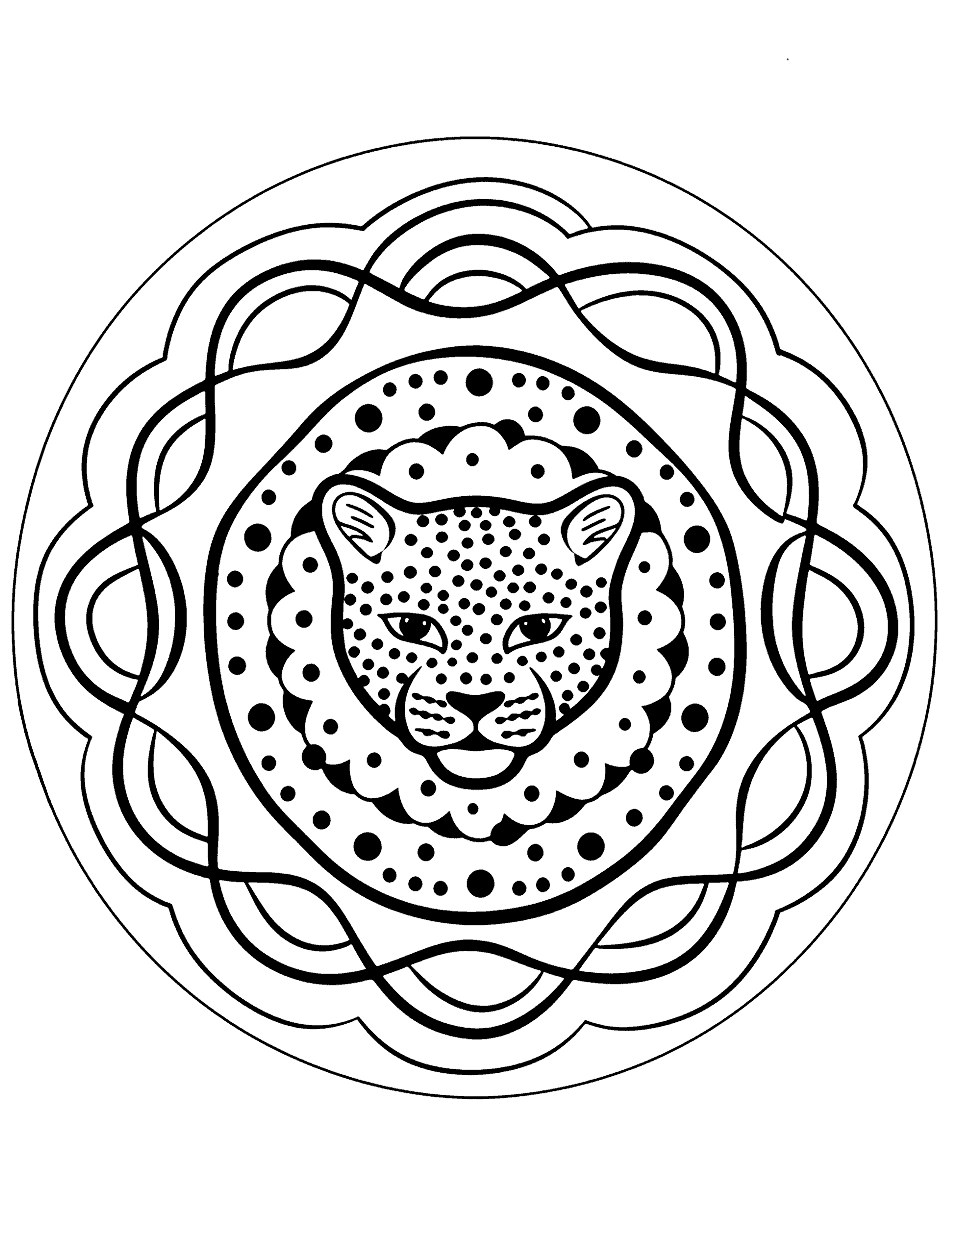 Leaping Leopard Mandala Coloring Page - An advanced mandala with a prowling leopard, perfect for those seeking a coloring challenge.